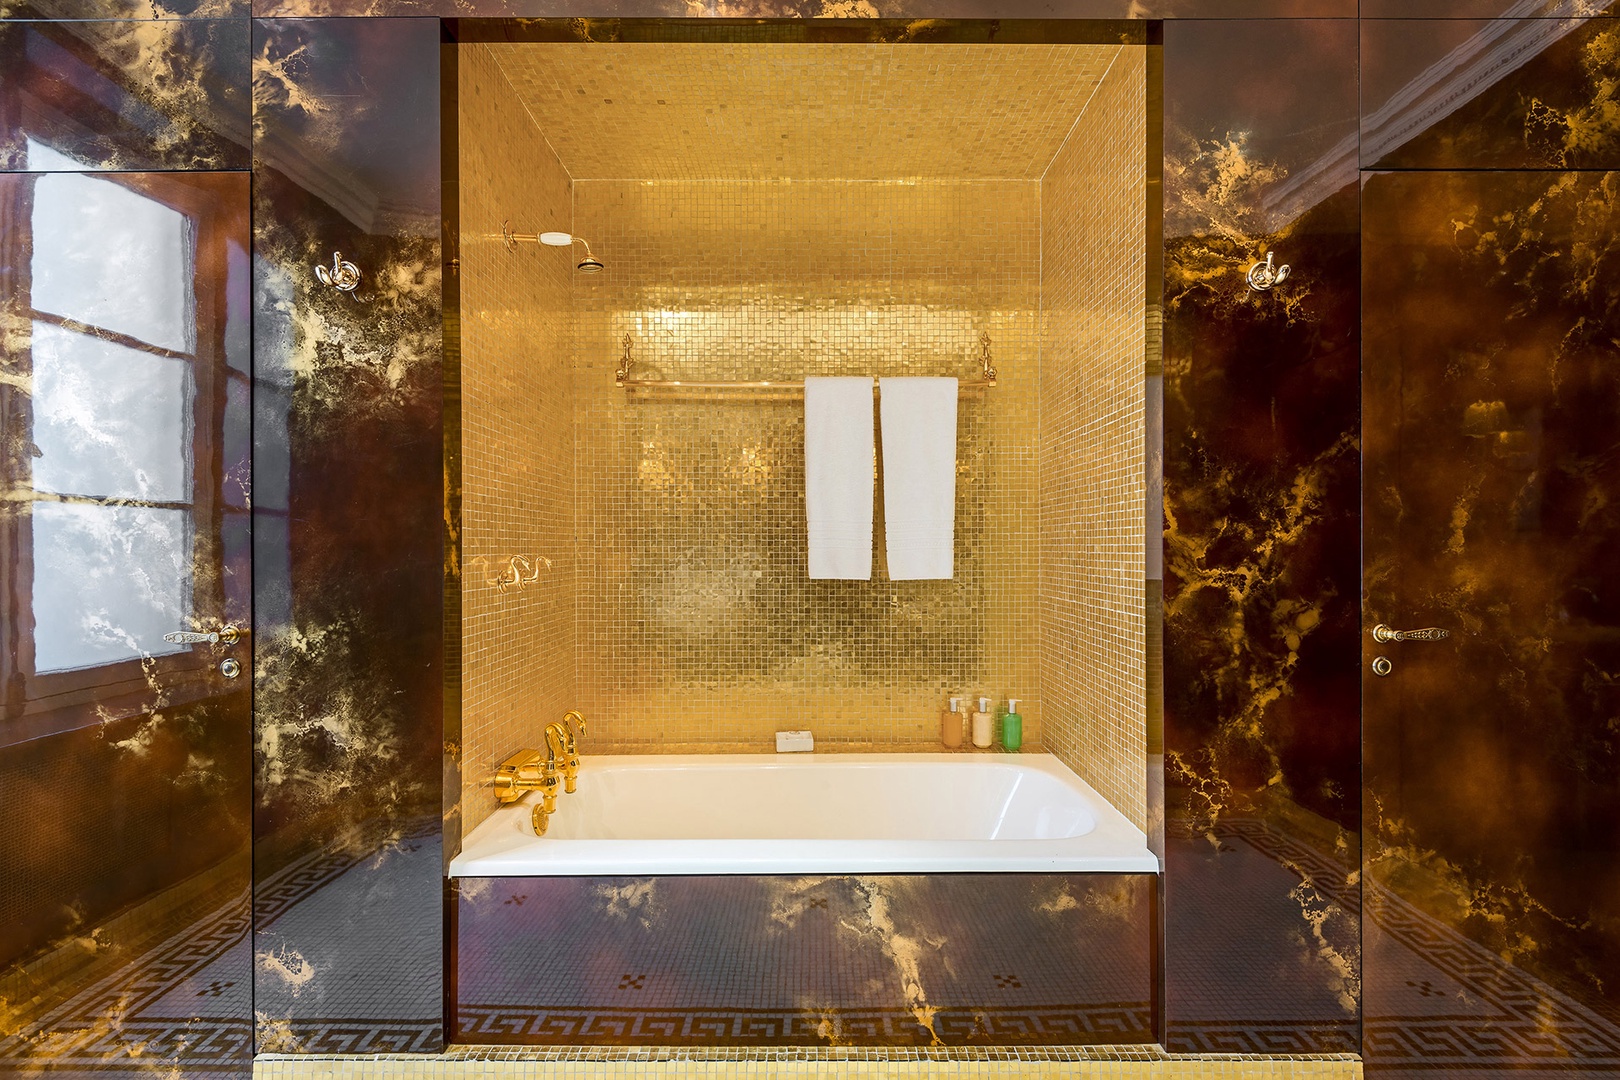 Enjoy a truly royal soak in the gorgeous alcove!